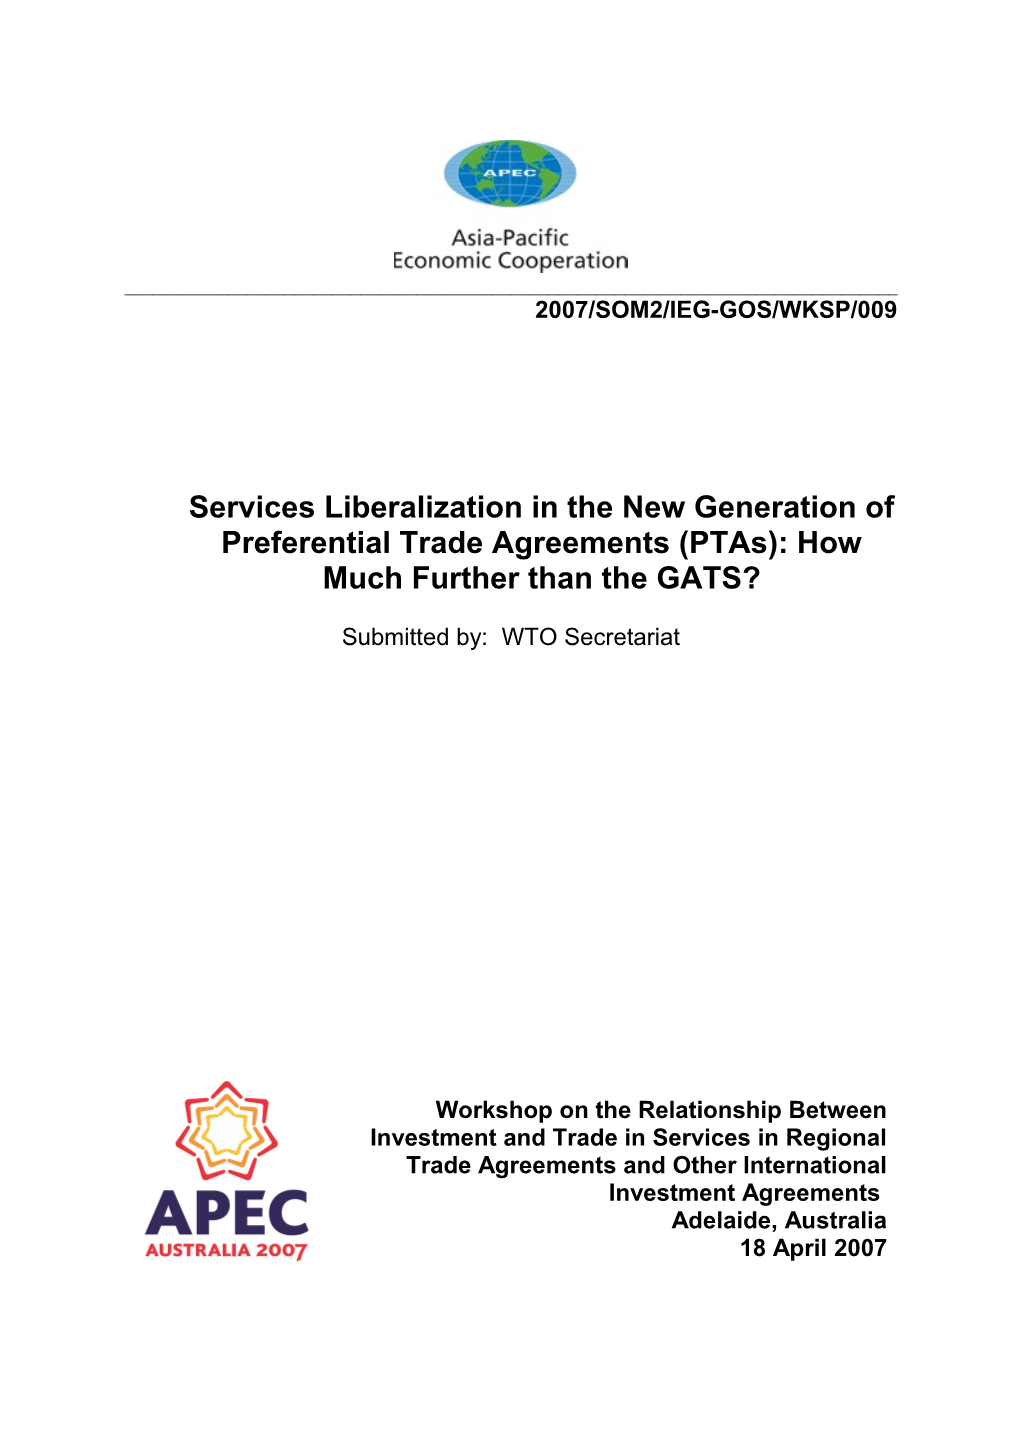 Services Liberalization in the New Generation of Preferential Trade Agreements (Ptas)